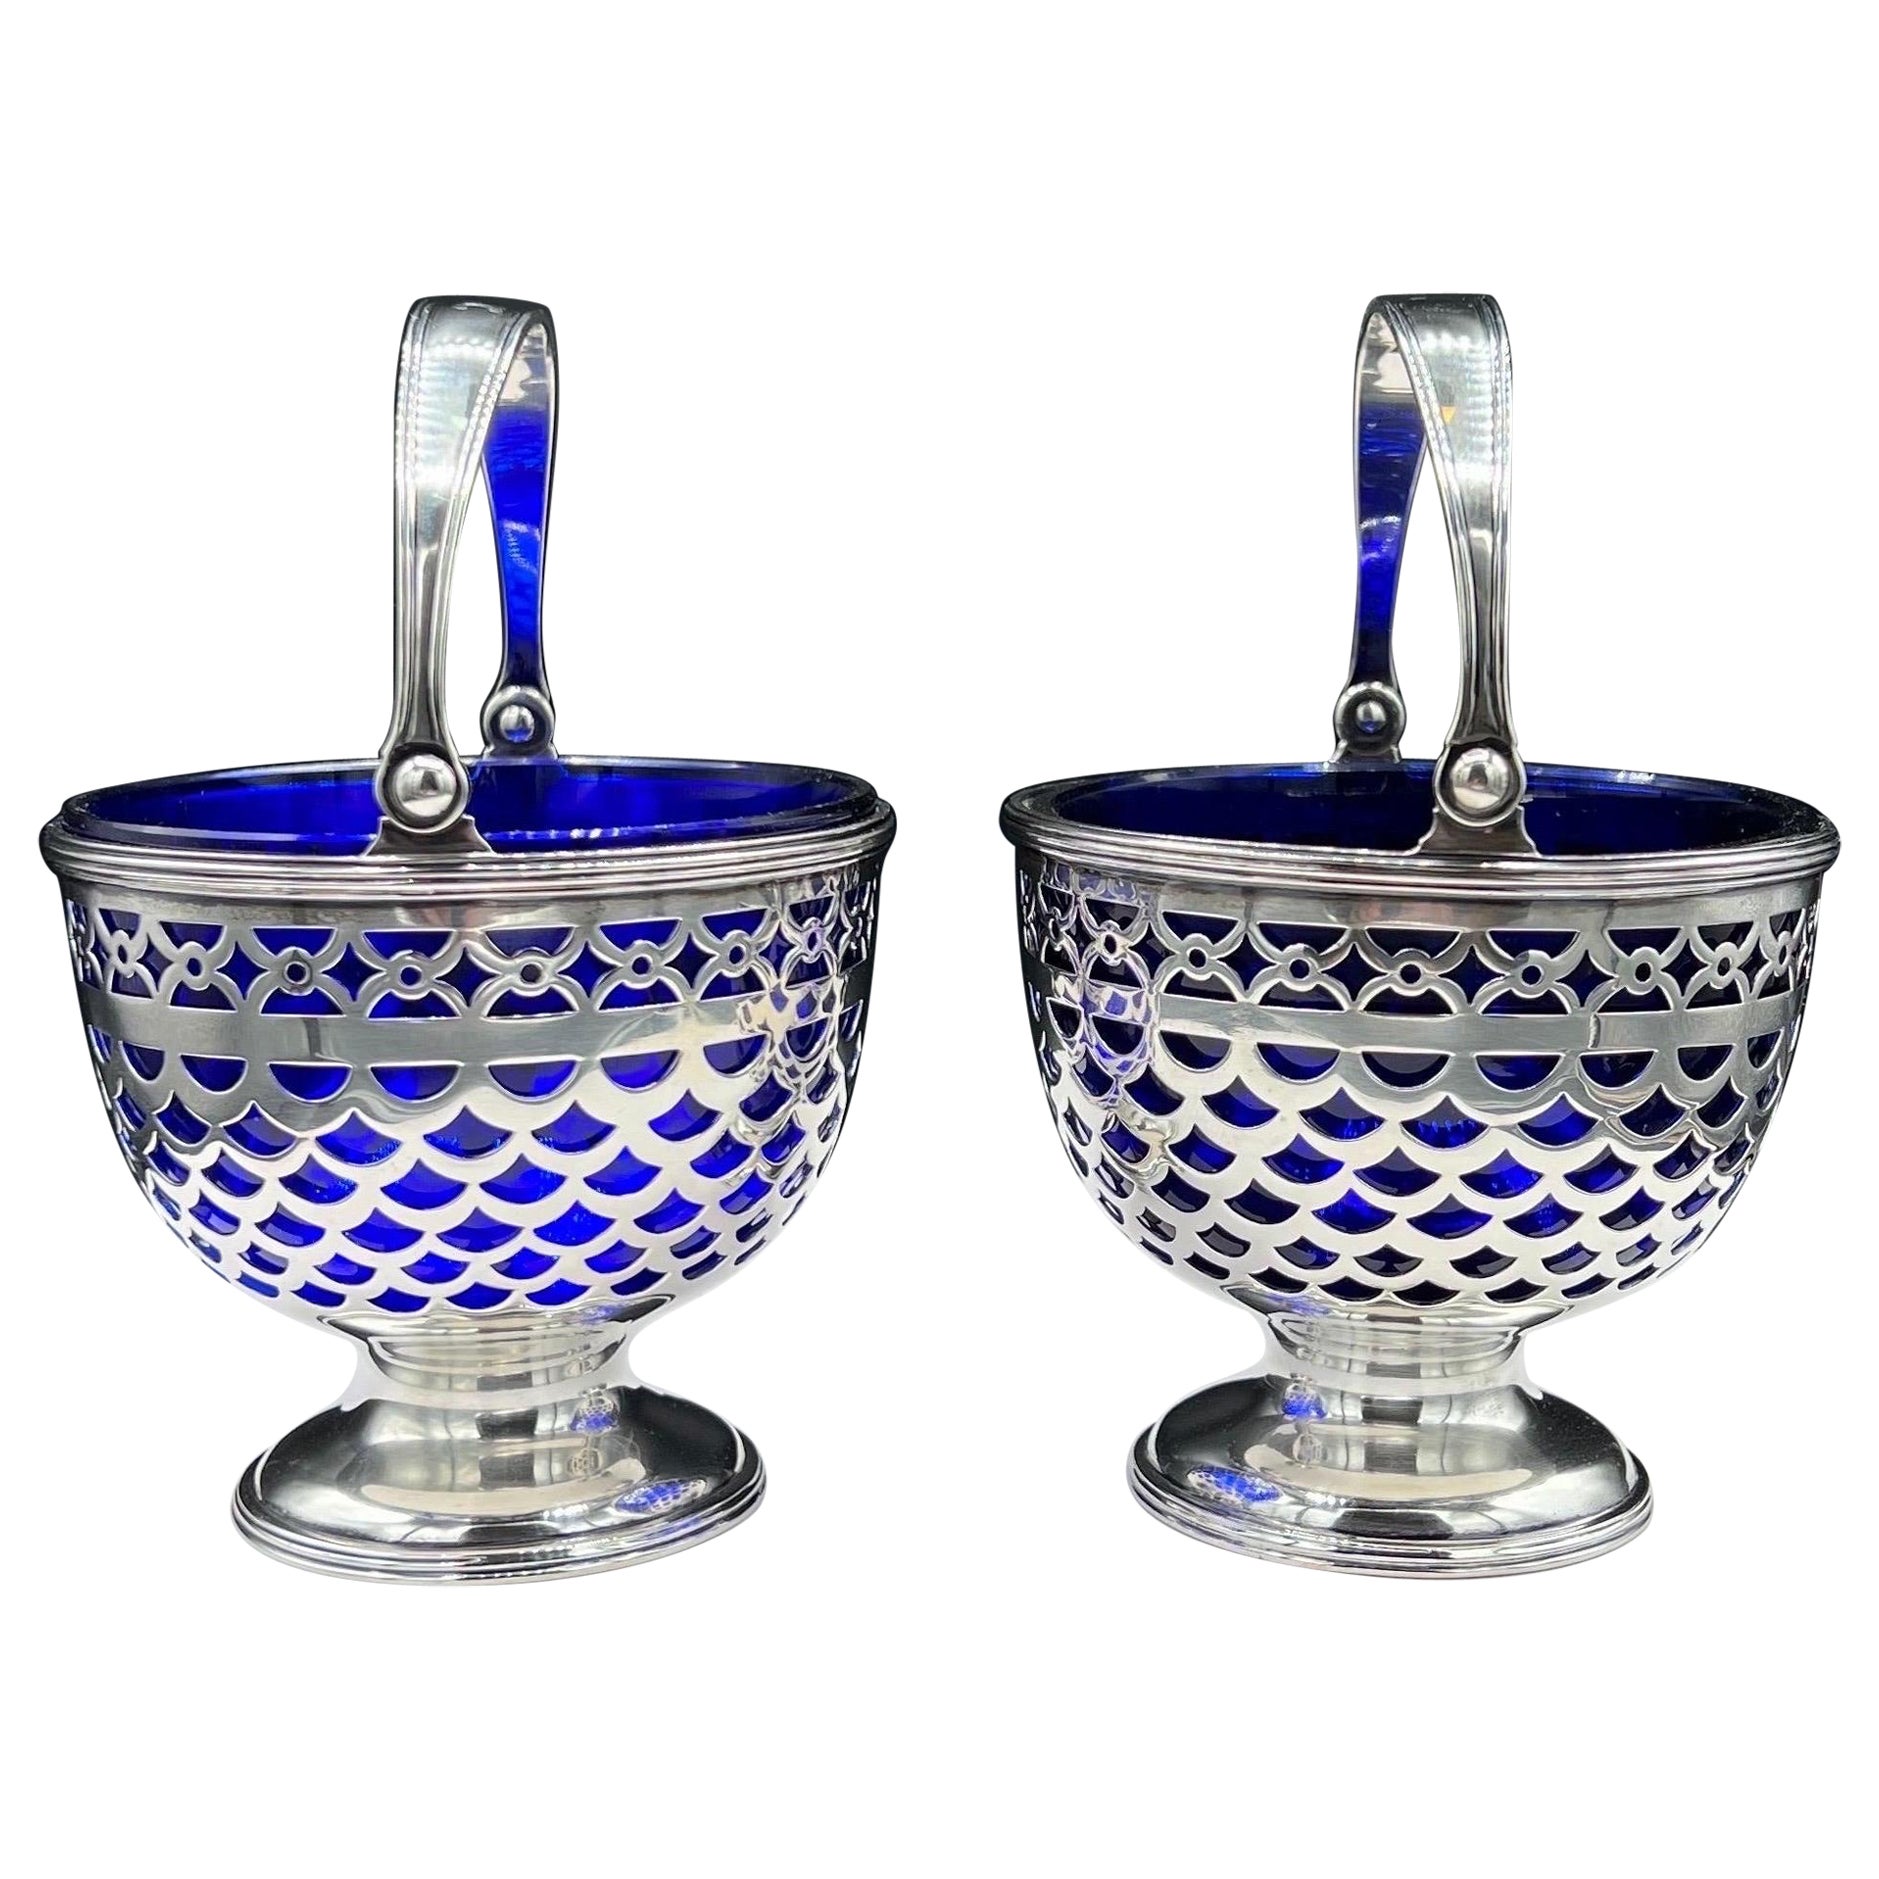 A Pair of Tiffany Baskets with Cobalt Liner